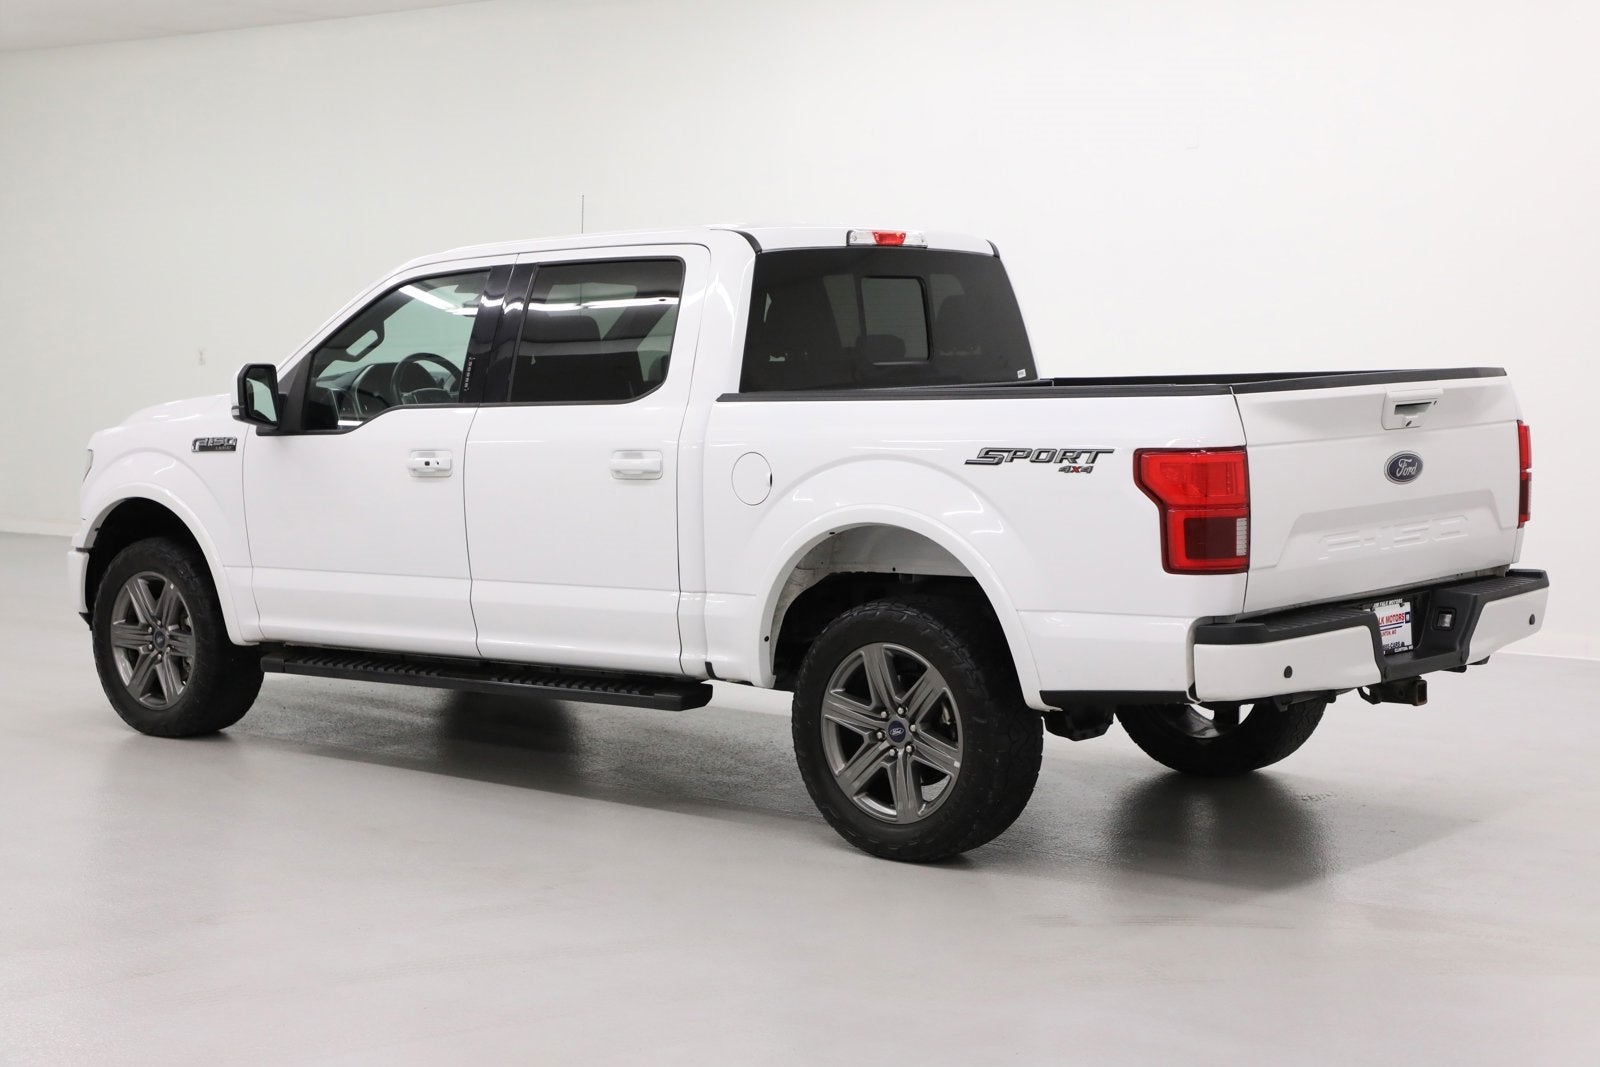 2020 Ford F-150 SuperCrew Lariat 4WD Heated Cooled Leather 5.0L V8 HD Rear Camera Navigation Remote Start Cruise